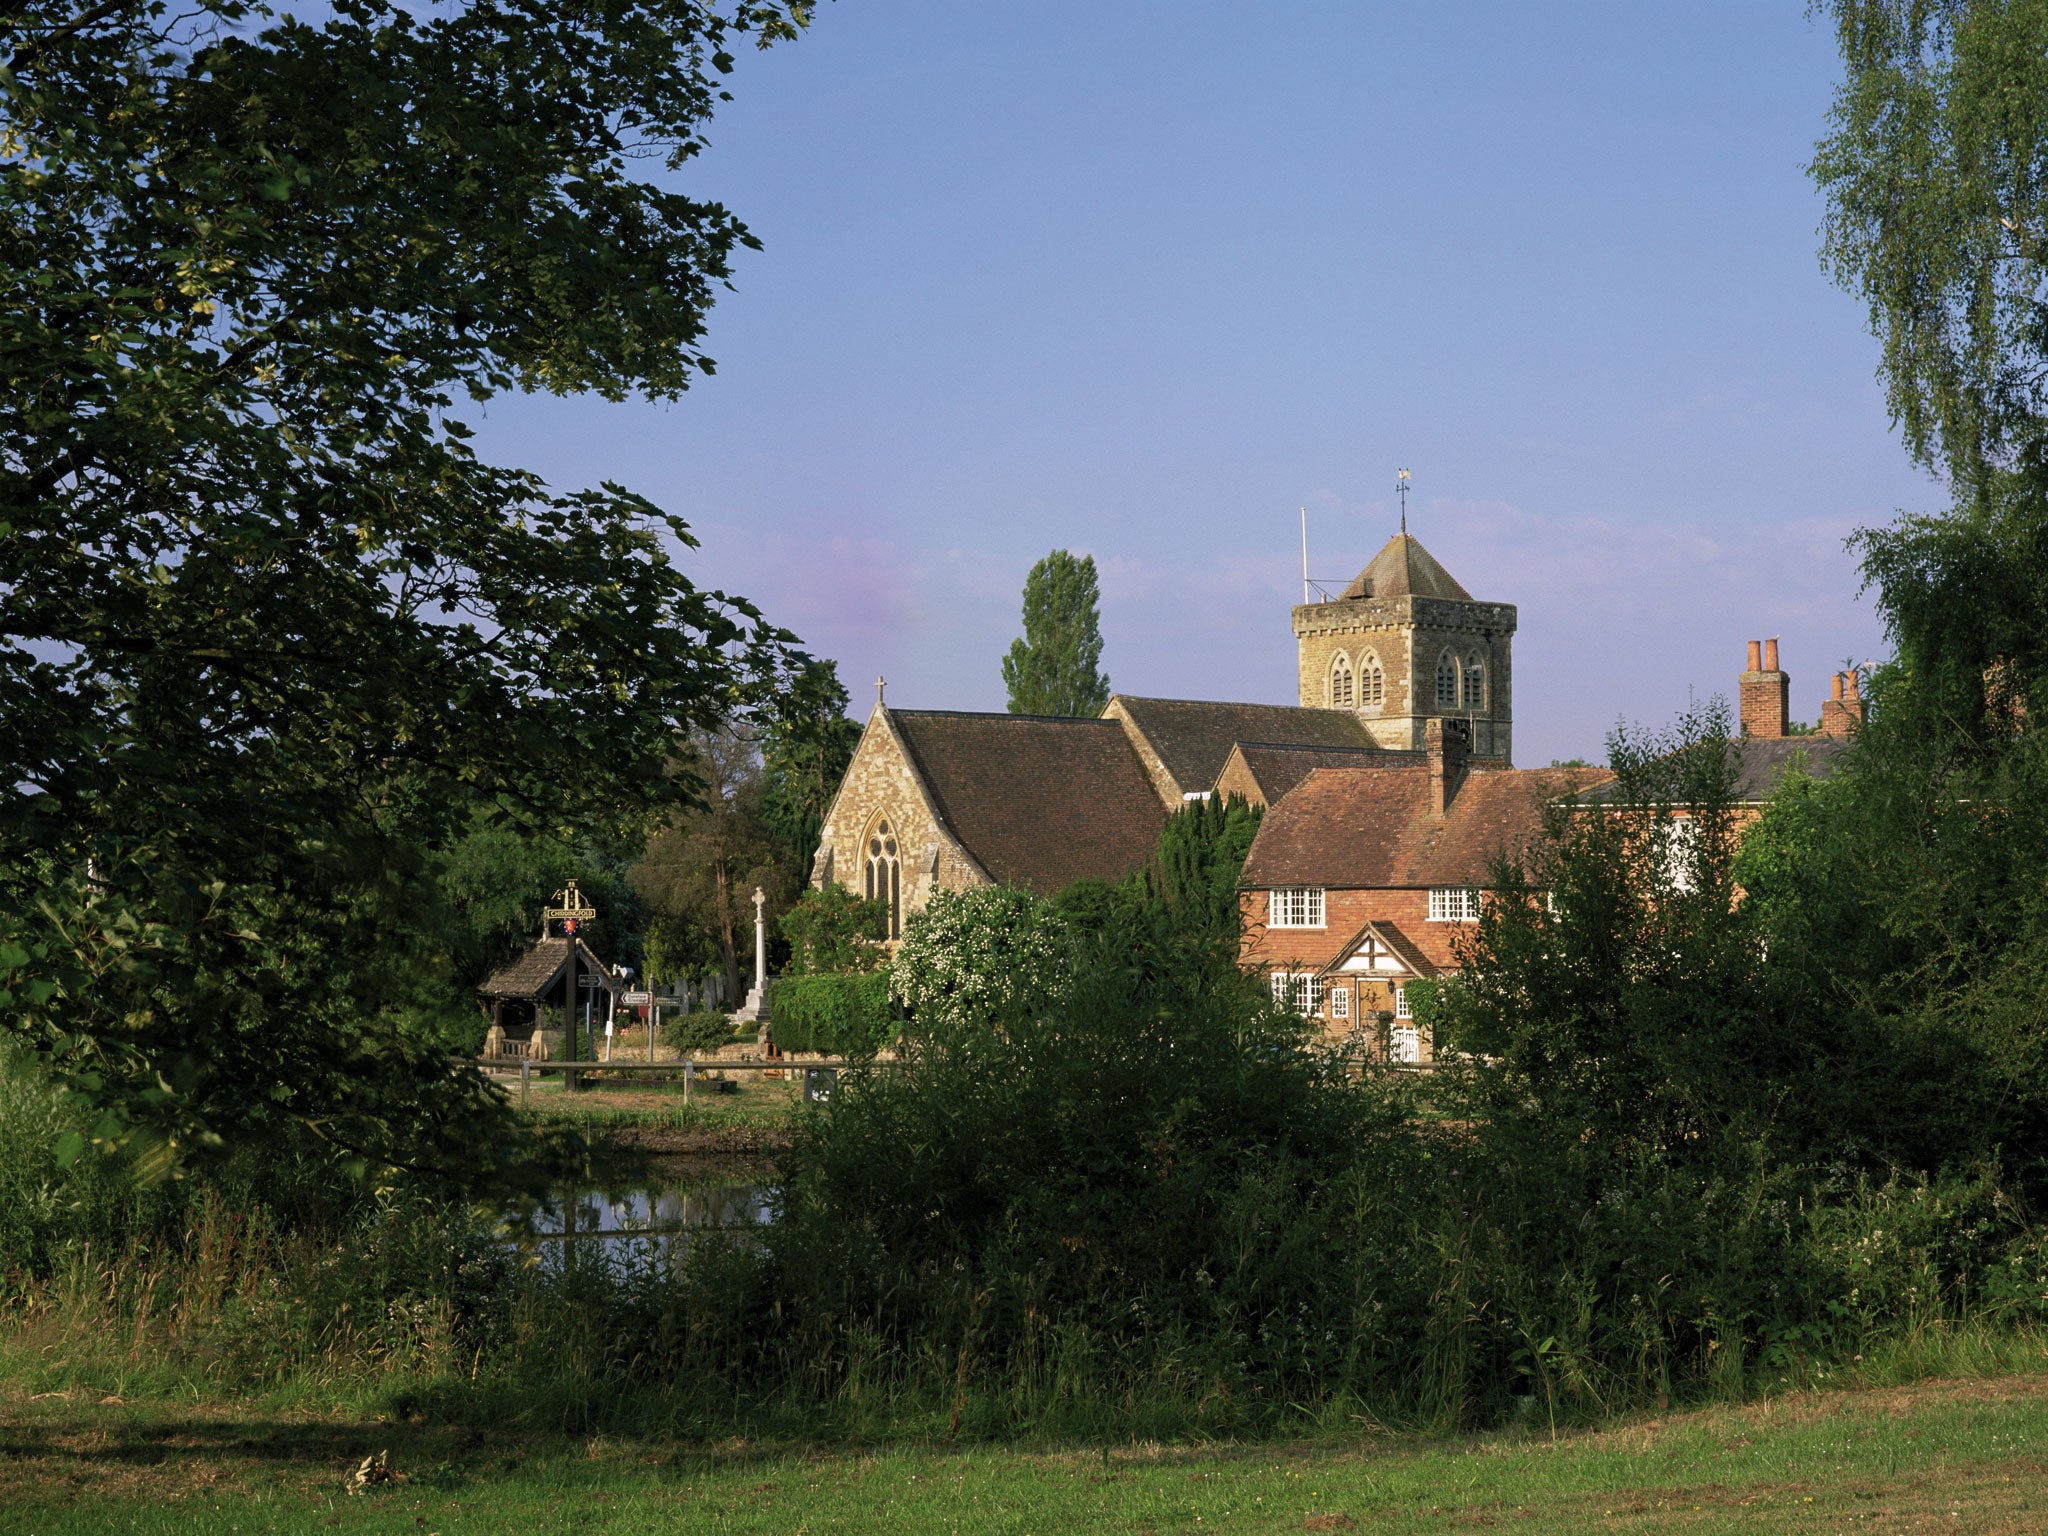 Waverley residents – such as those in Chiddingfold, pictured – experience the highest living standards in rural Britain, according to a study